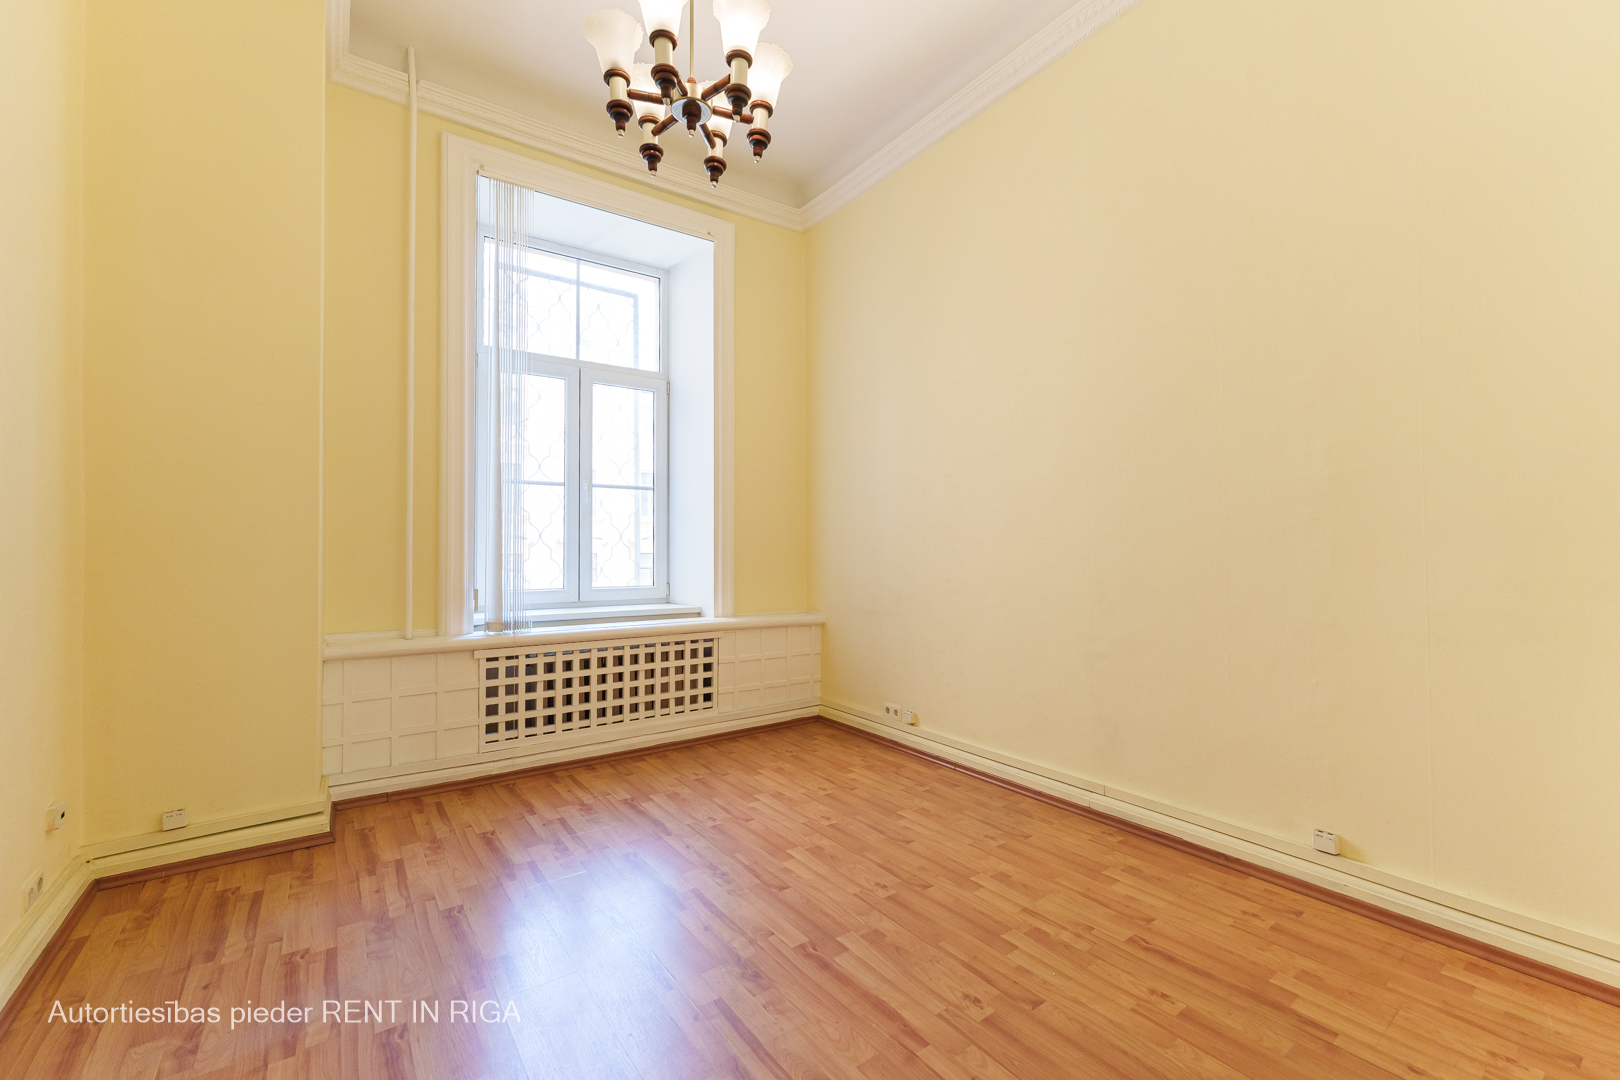 Office for rent, Citadeles street - Image 1